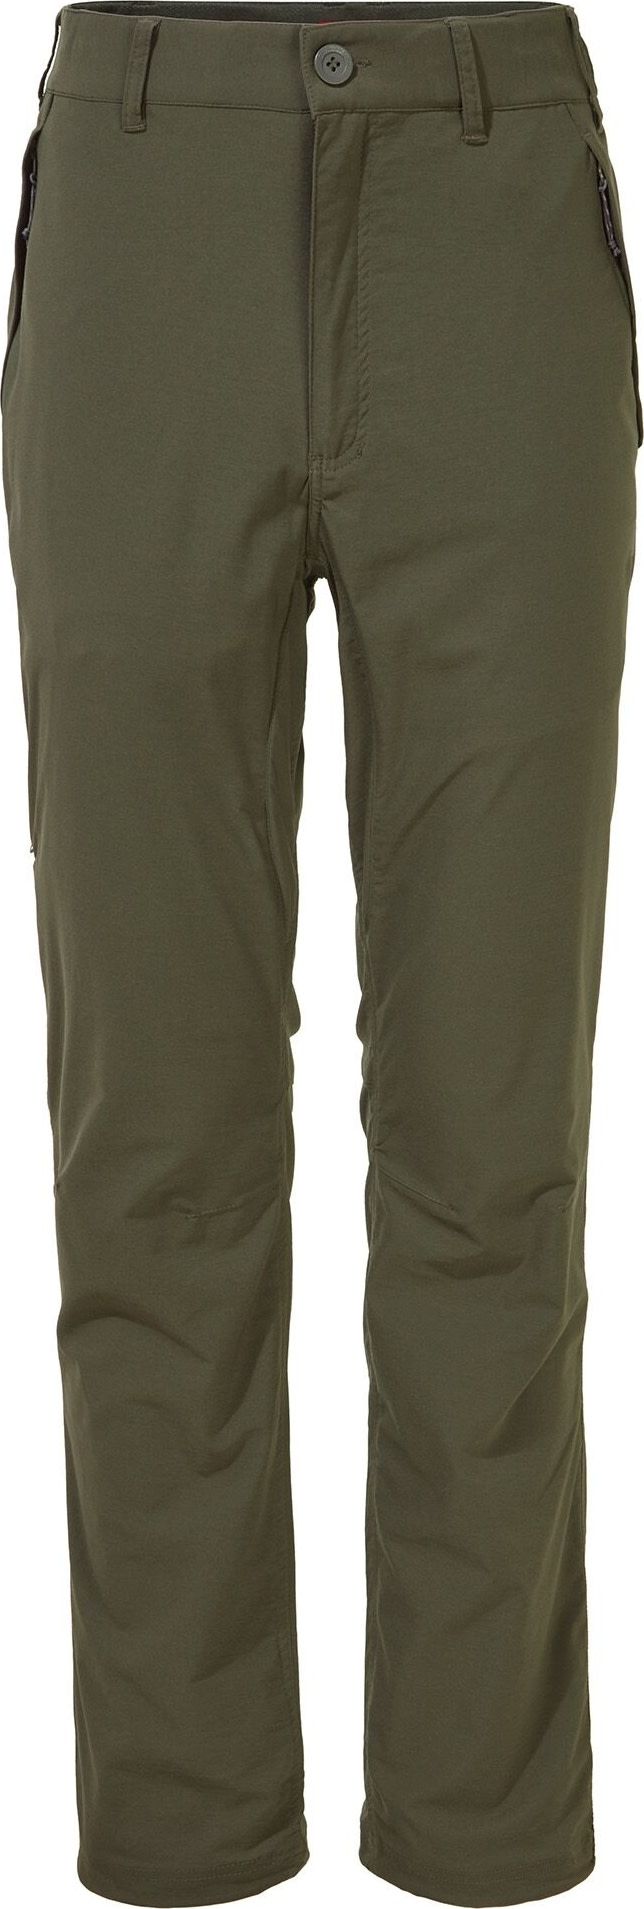 Craghoppers Men's NosiLife Pro Trousers Regular  Woodland Green Craghoppers